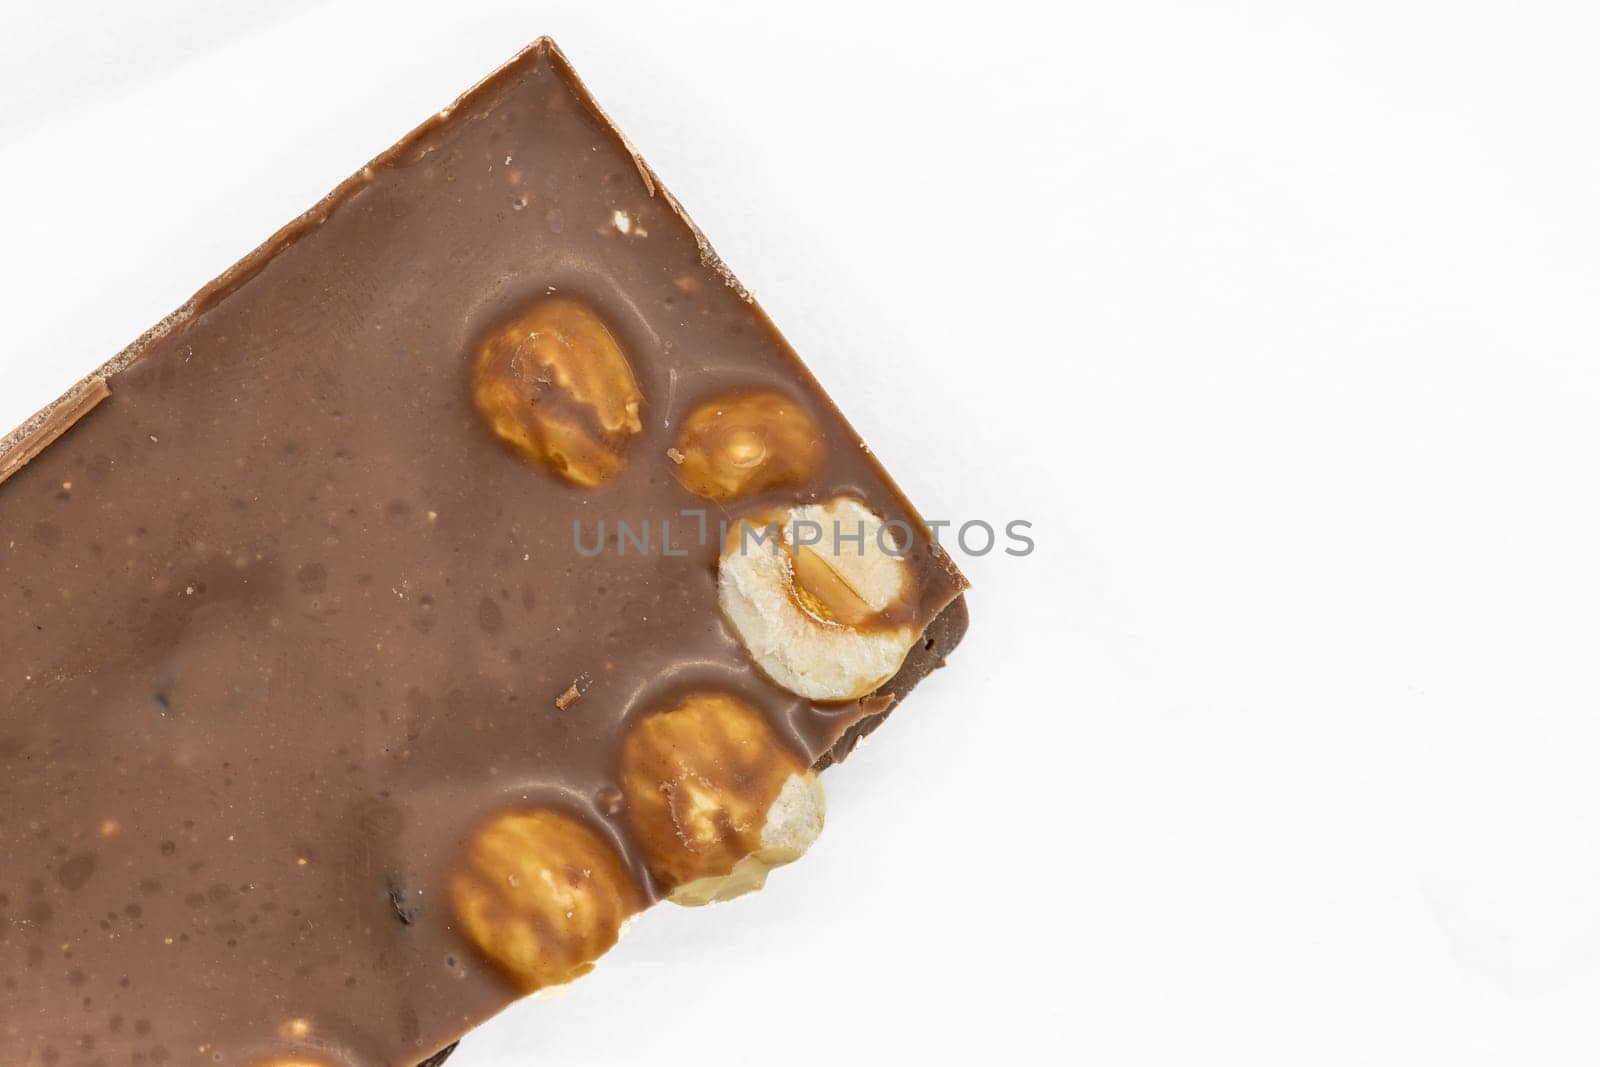 A delectable piece of chocolate placed elegantly on a pristine white table, enticingly inviting the viewer to indulge in its rich and decadent flavor